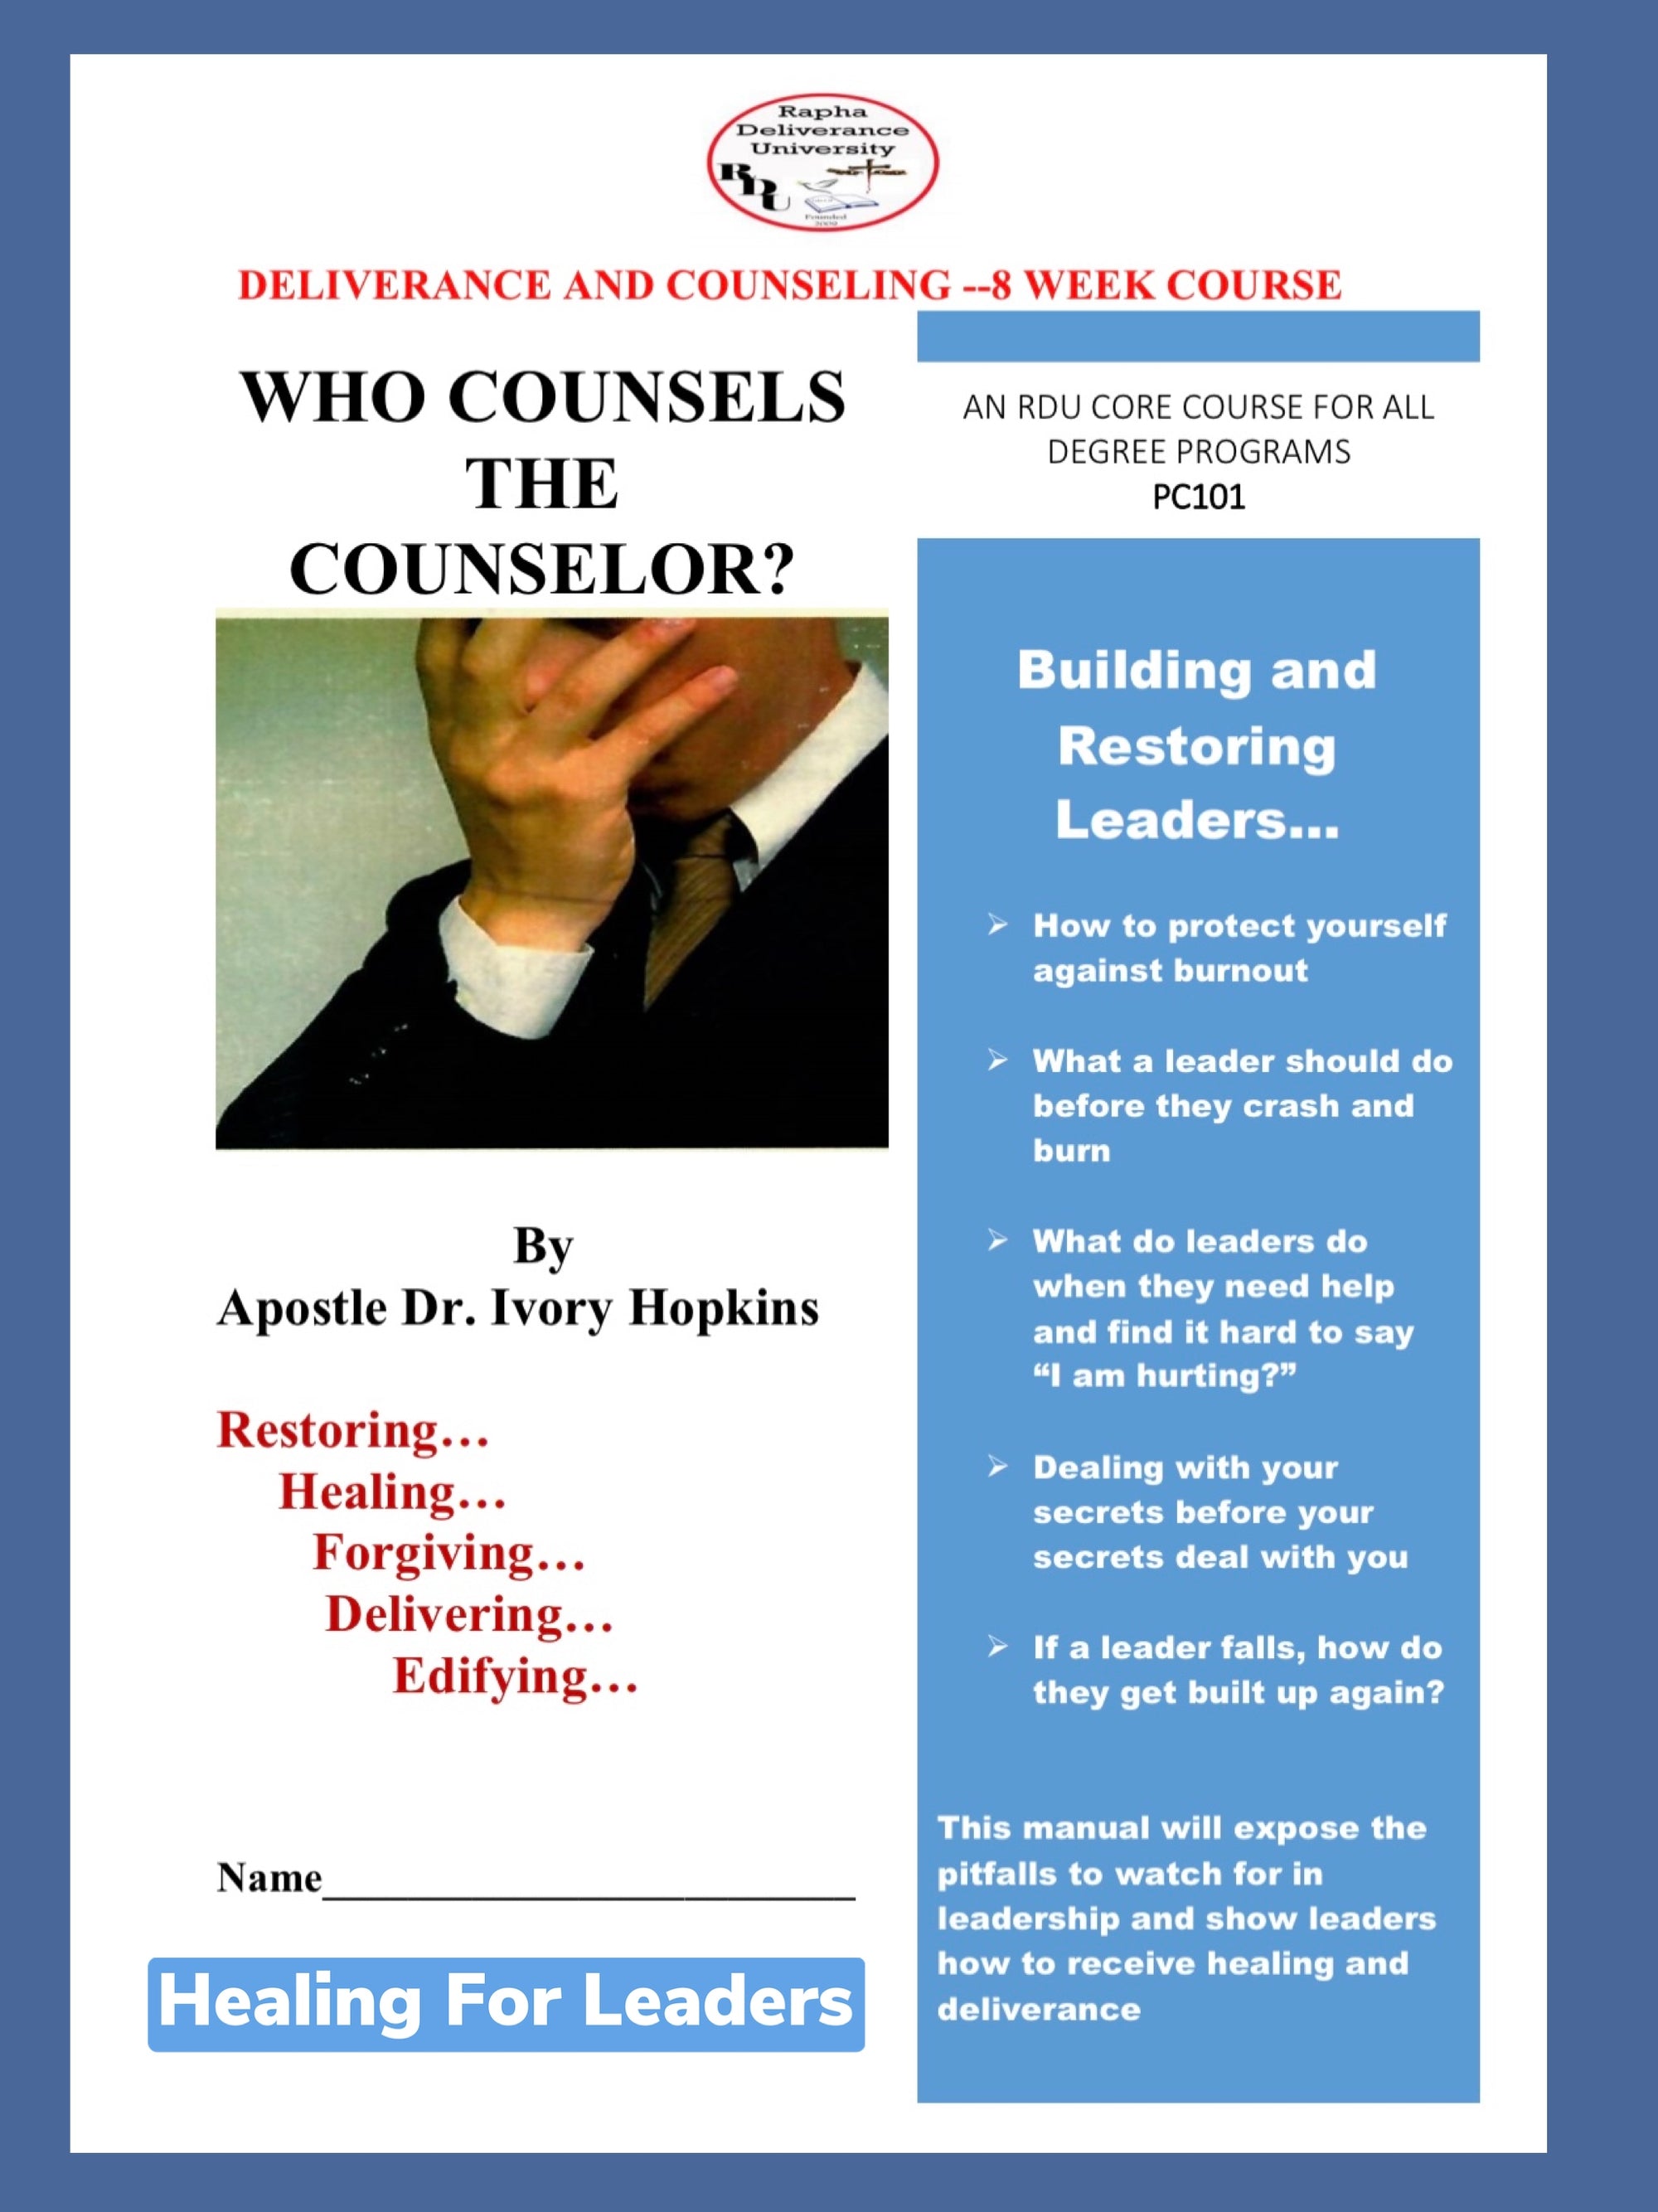 WHO COUNSELS THE COUNSELOR